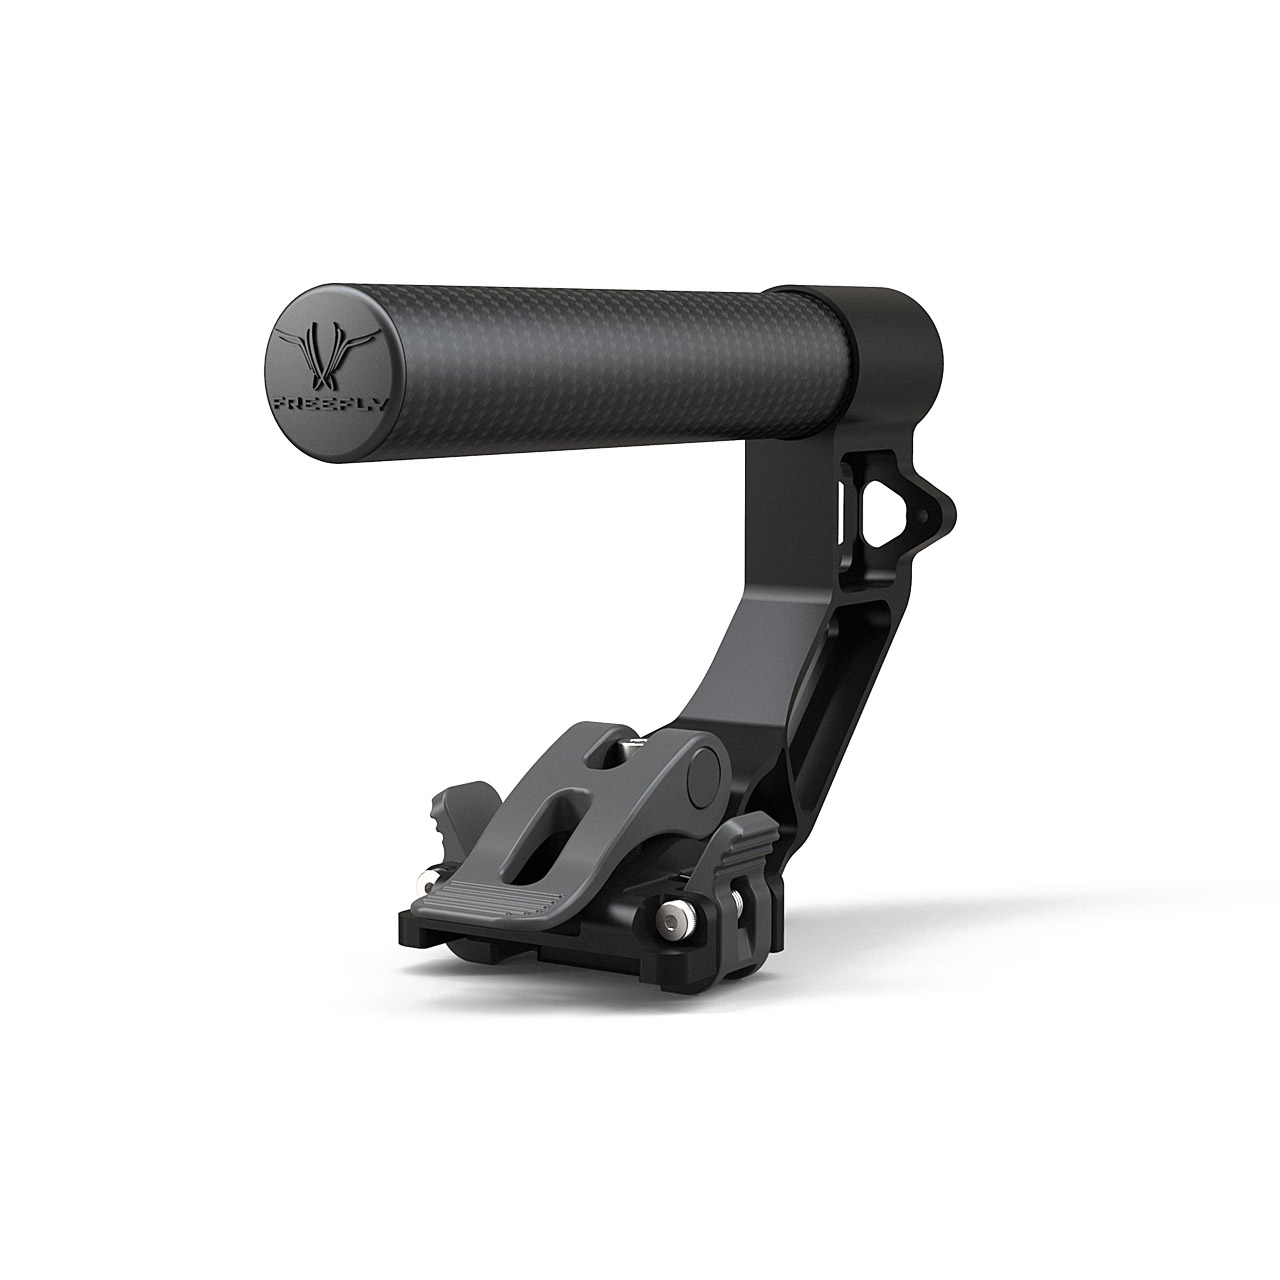 Freefly XL Top Handle, Accessories for gimbals, Gimbals, Tripods /  Sliders / Grip